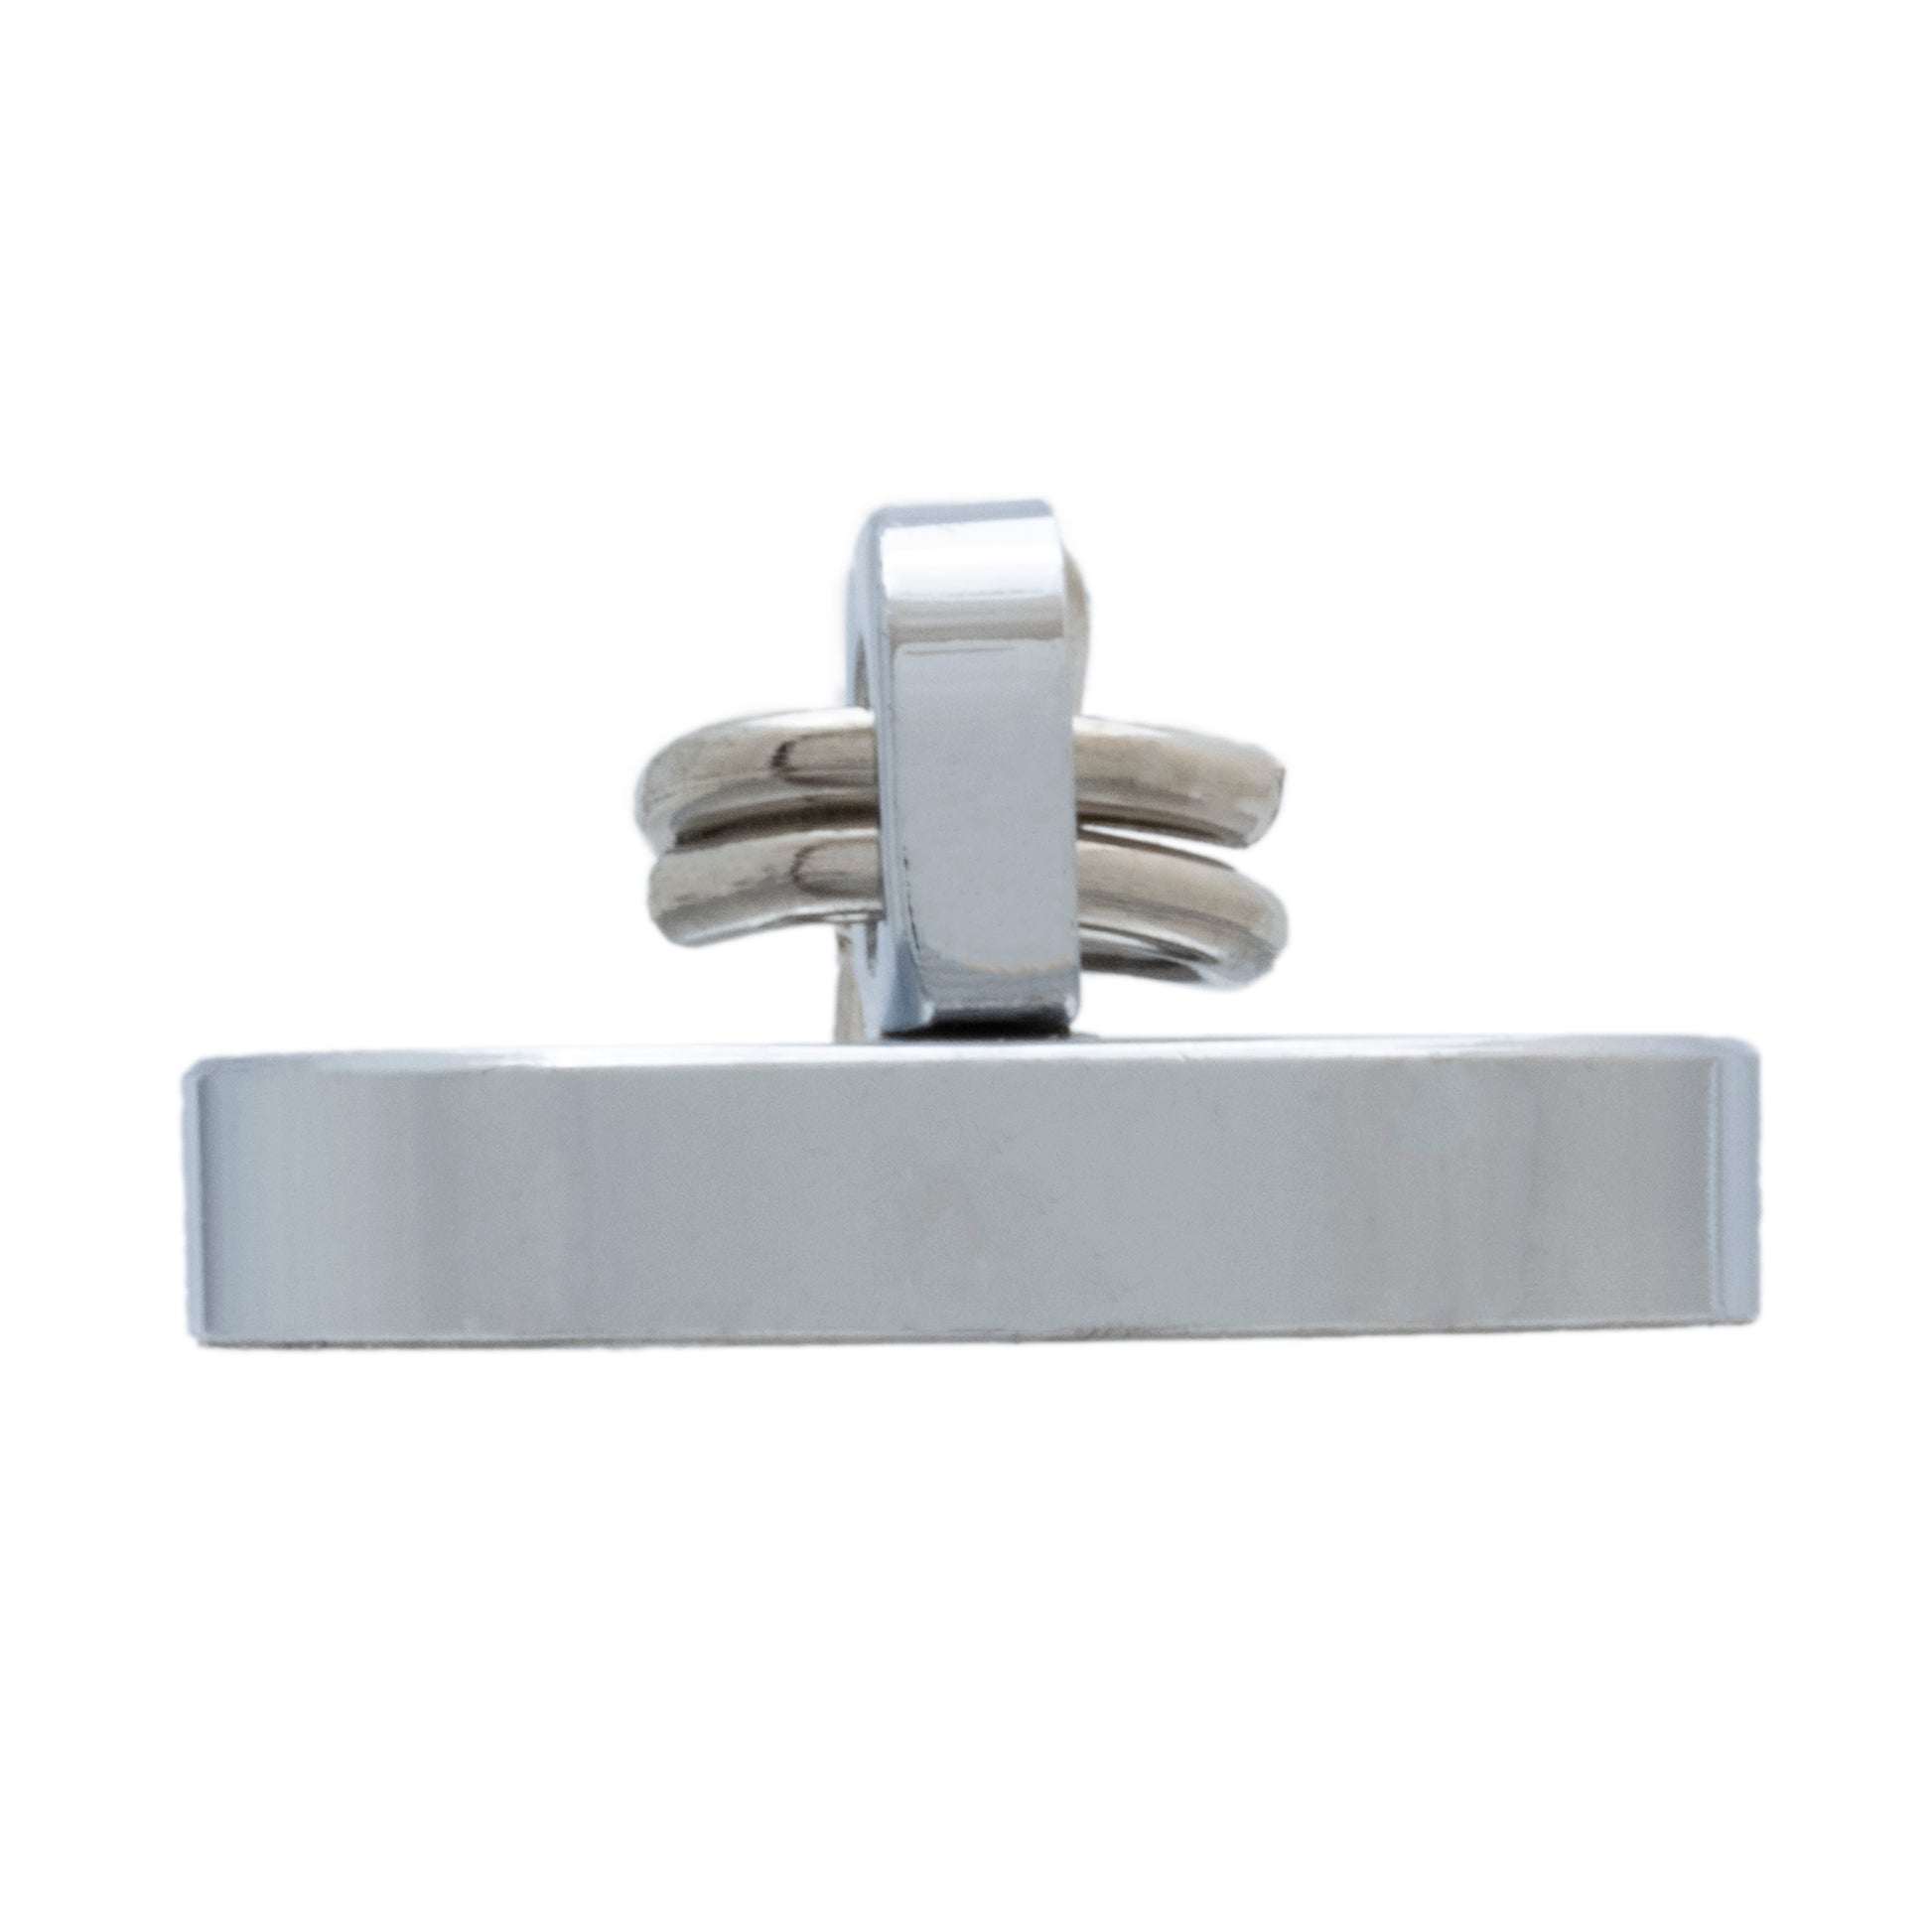 Load image into Gallery viewer, MHHH07589BX Neodymium Swinging Magnetic Hook - Front View